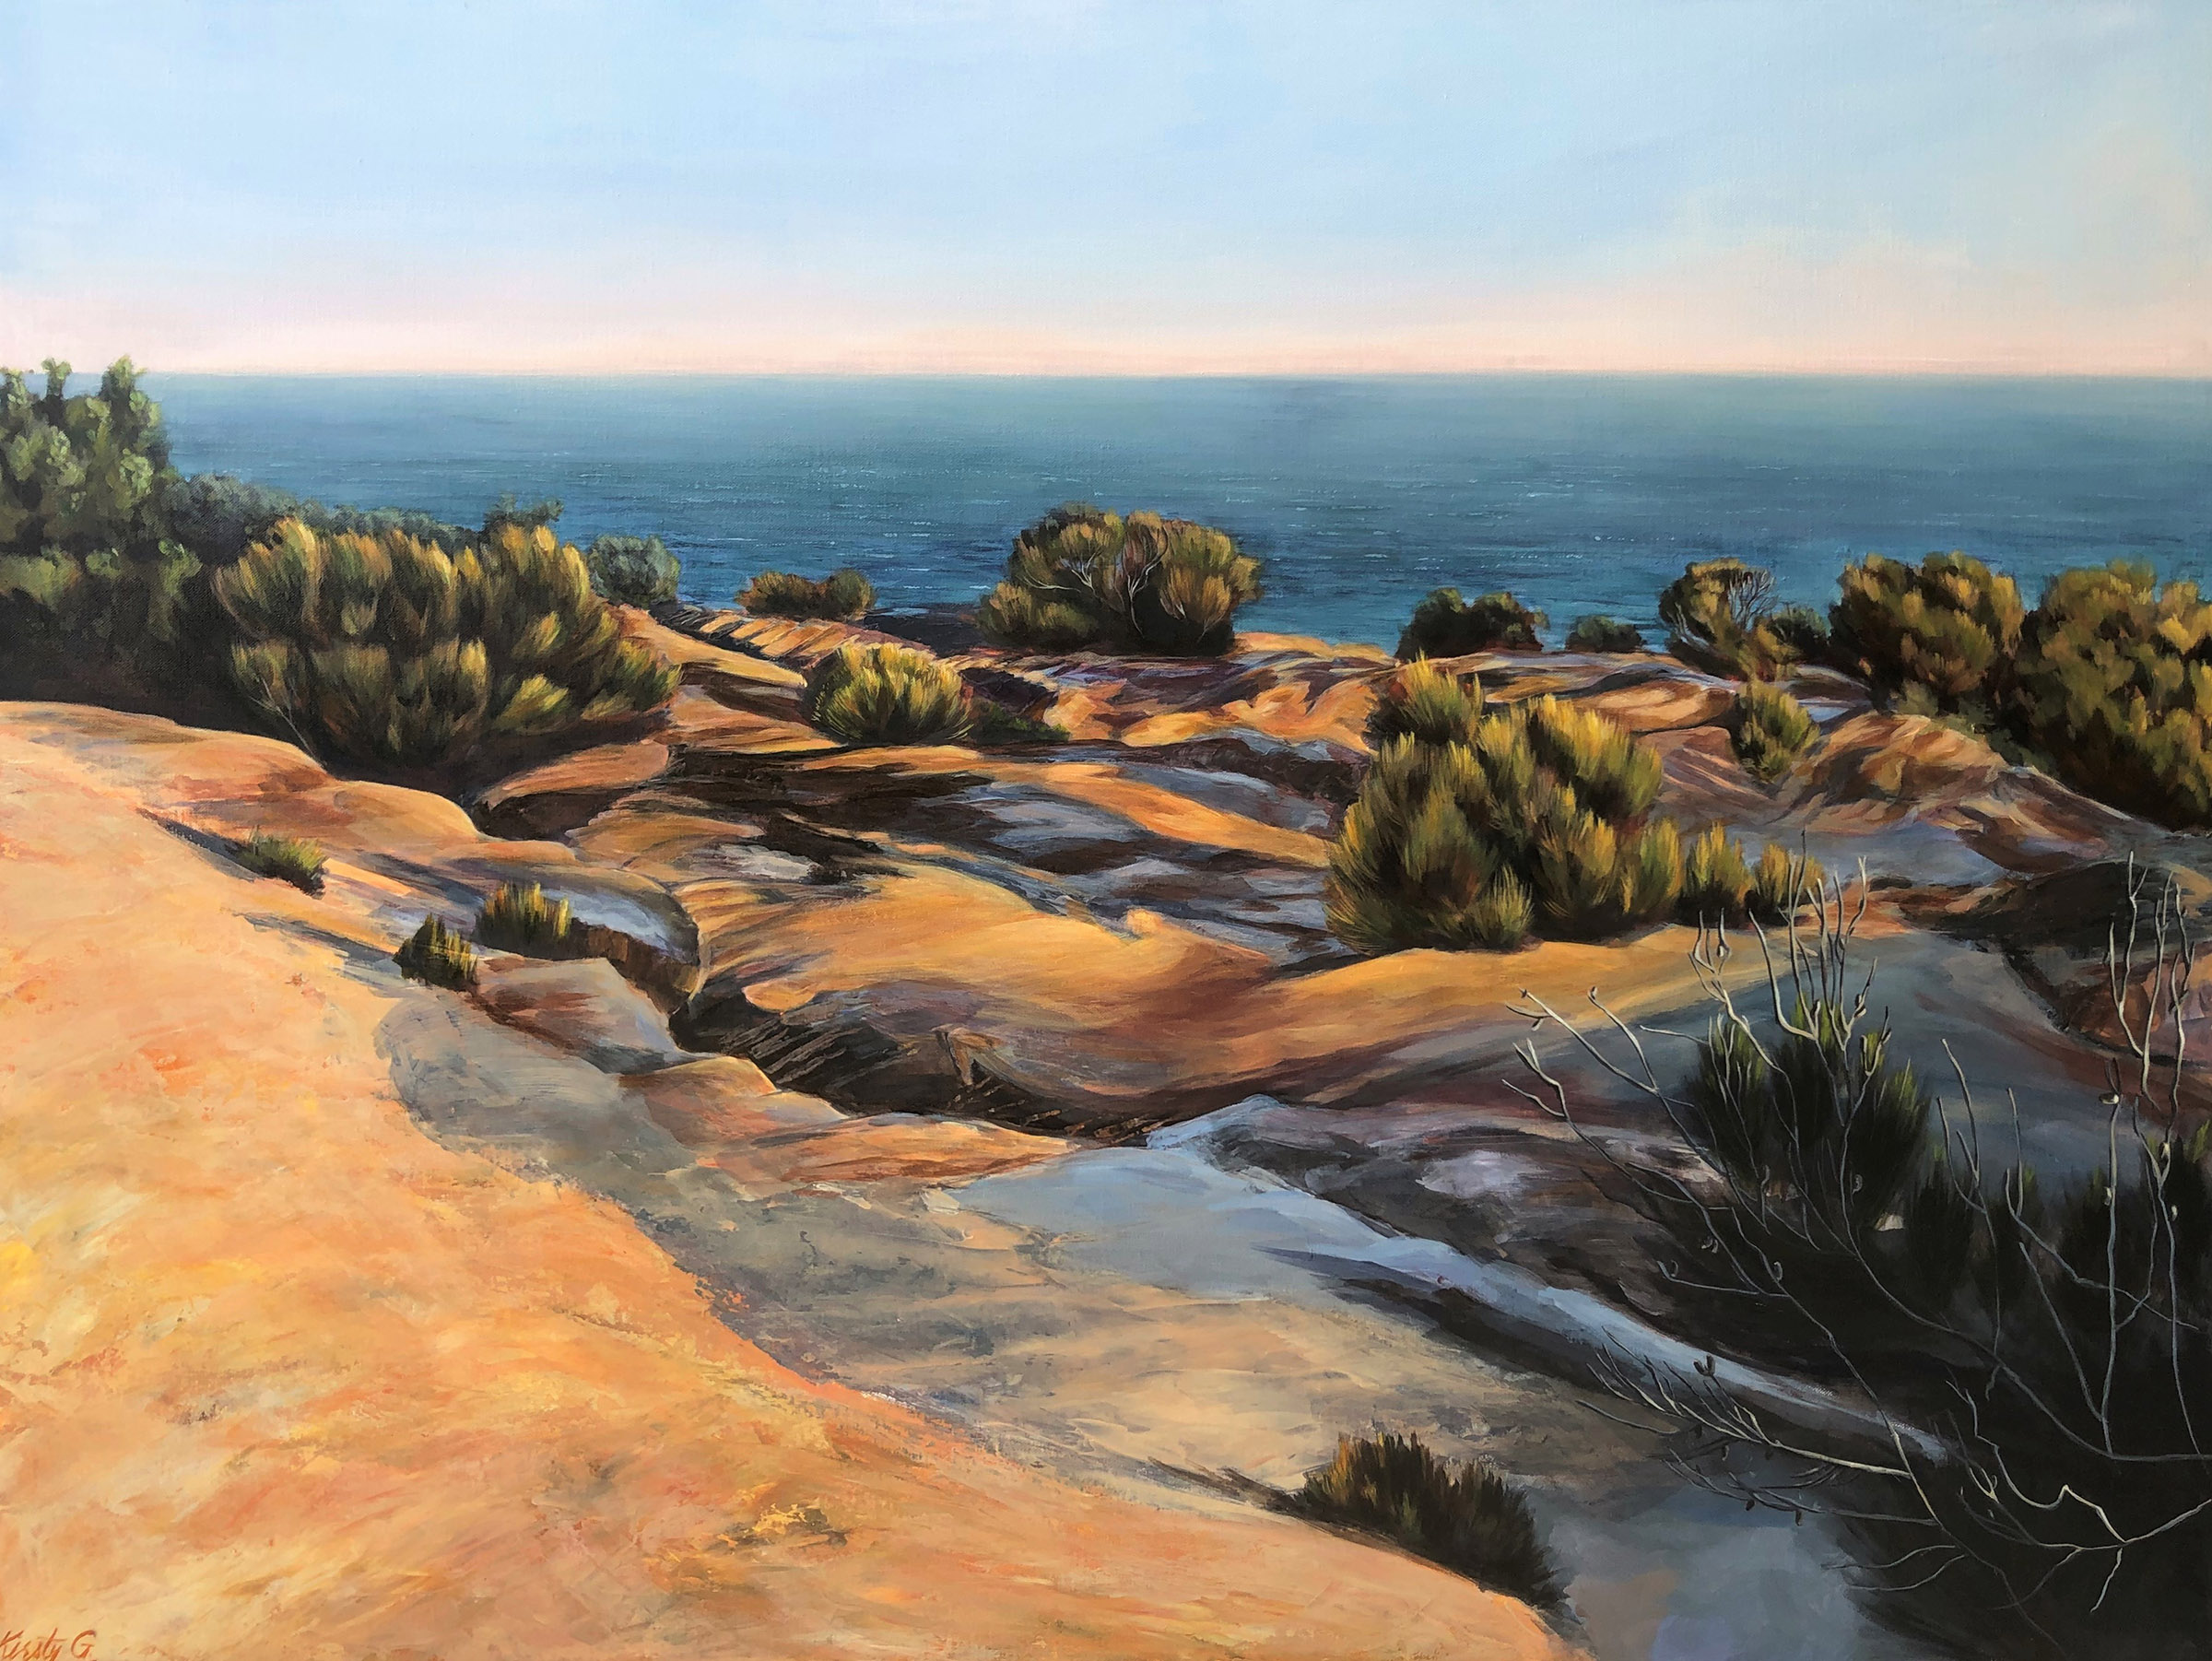 Afternoon Light on an Ancient Land by Kirsty Gautheron | Lethbridge Landscape Prize 2021 Finalists | Lethbridge Gallery